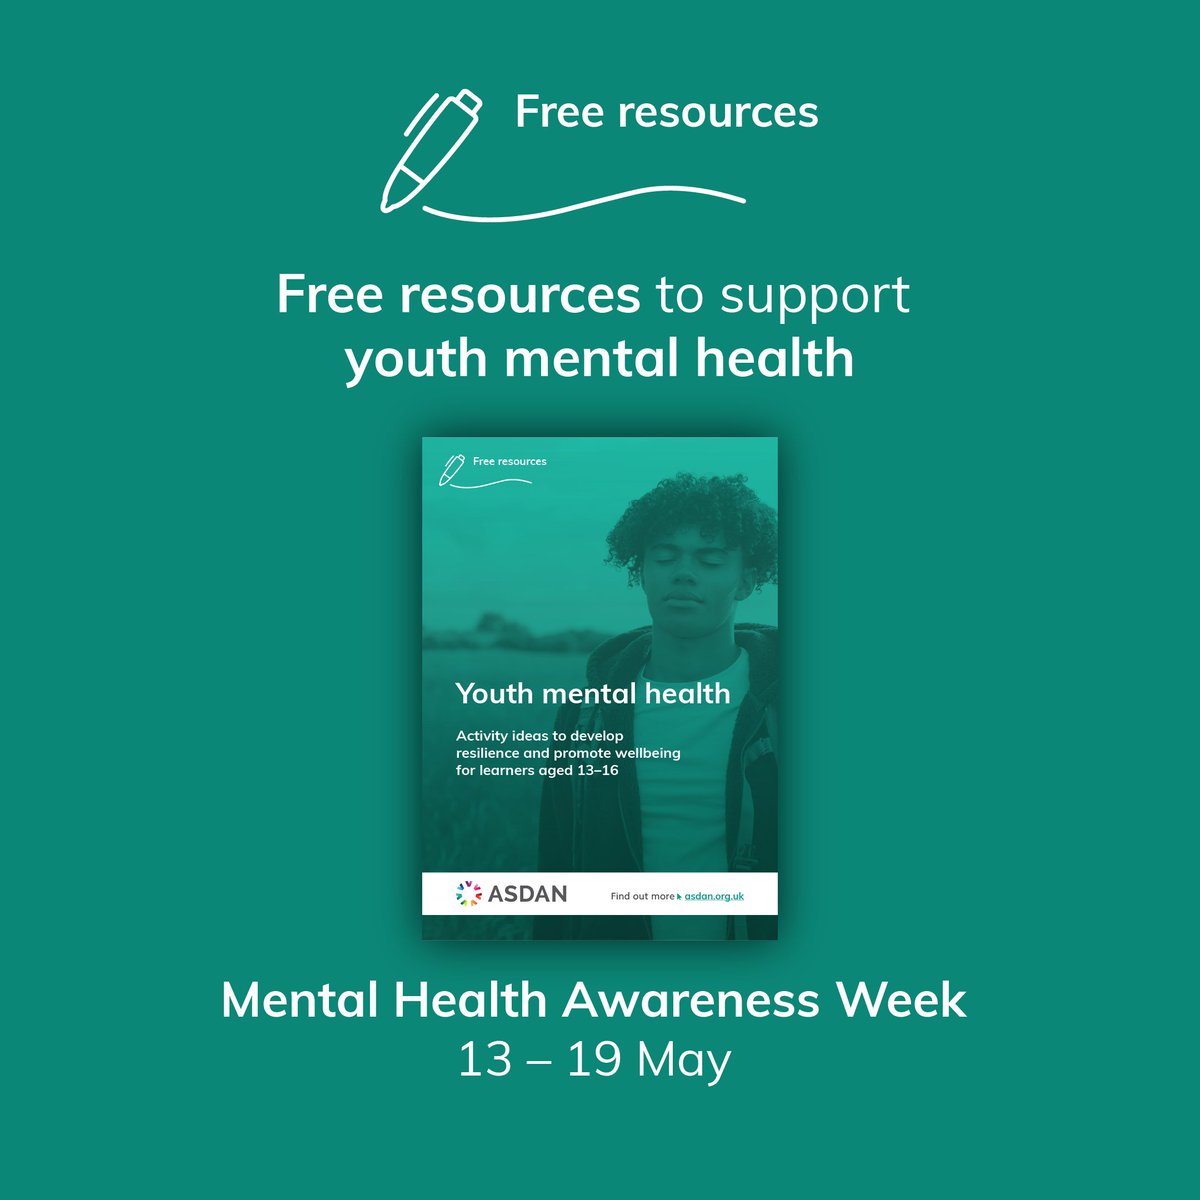 The @mentalhealth states that 50% of mental health problems are established by age 14 and 75% by age 24. Download your FREE young people's mental health resource pack for #MentalHealthAwarenessWeek (13-19 May)👉 lnkd.in/giV3afZx #MentalHealth #Wellbeing #FreeResources